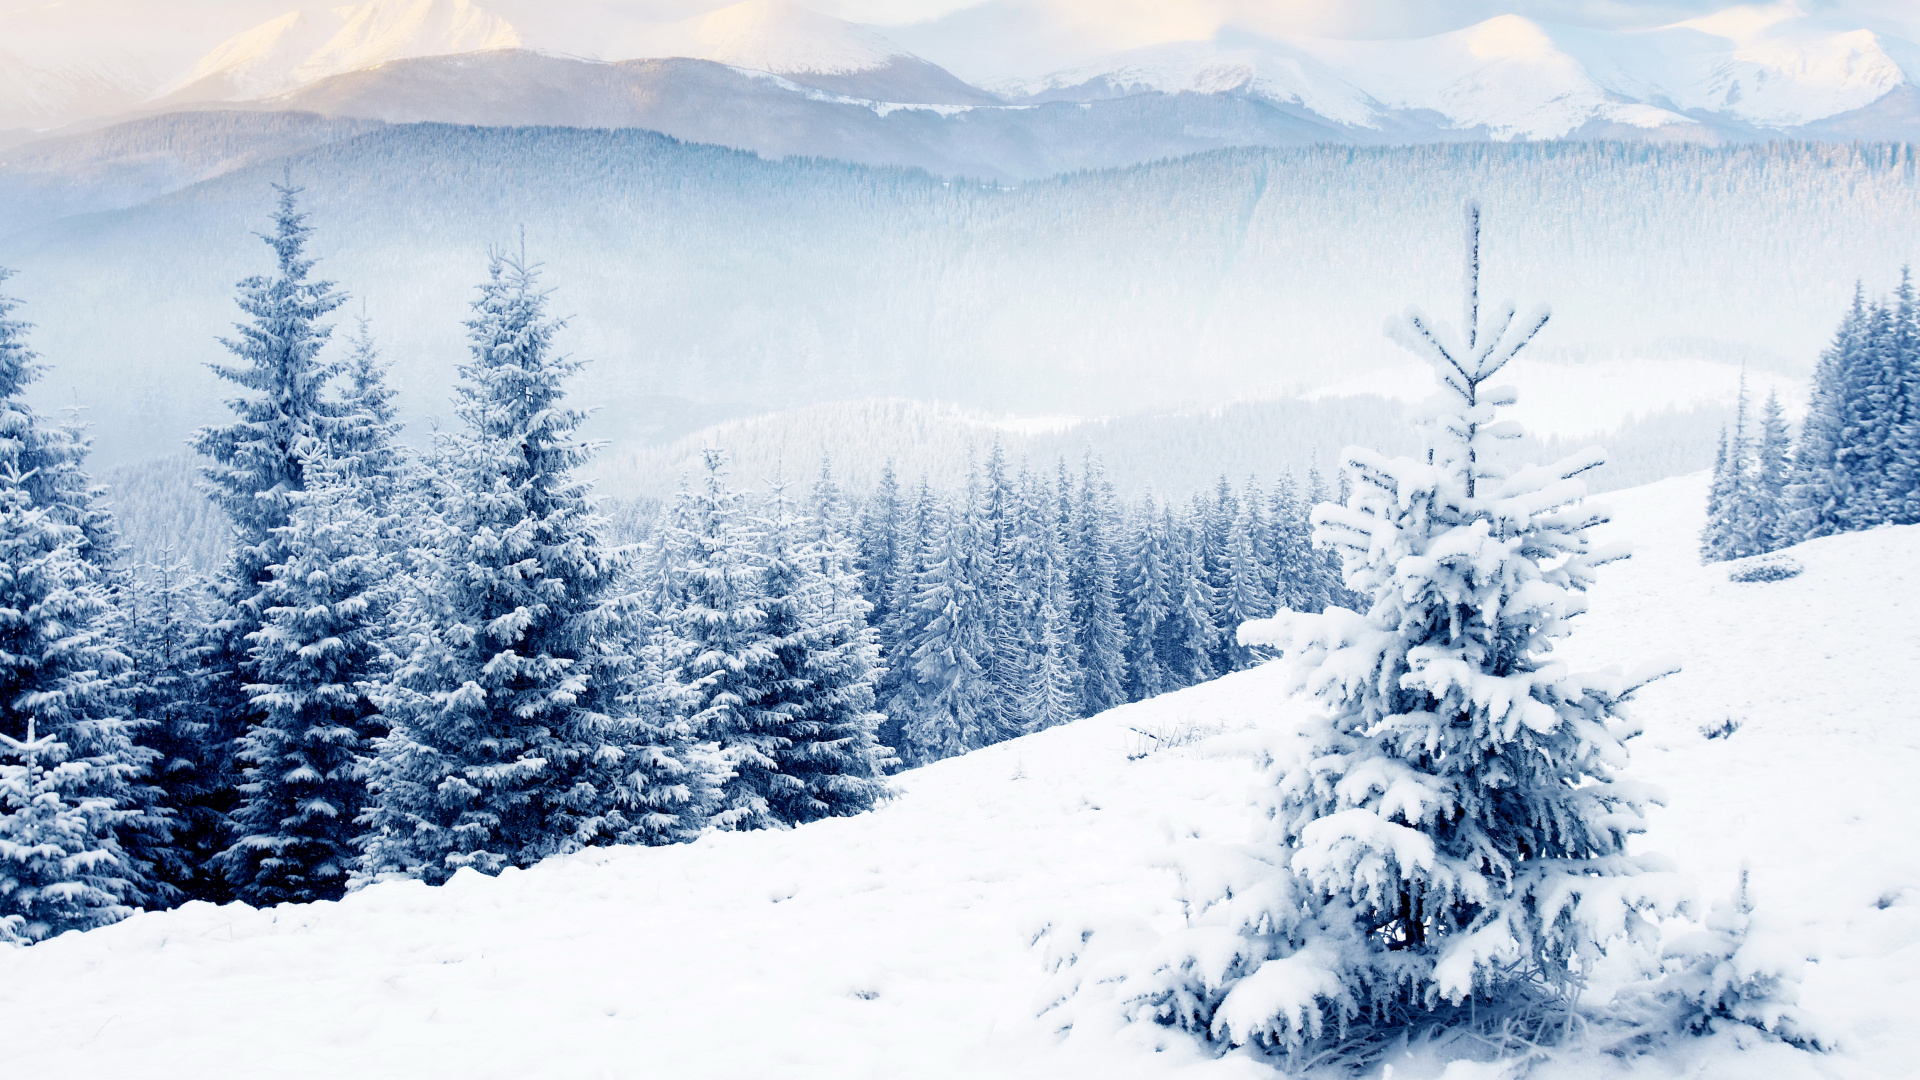 Snow Covered Pine Trees and Mountains During Daytime. Wallpaper in 1920x1080 Resolution